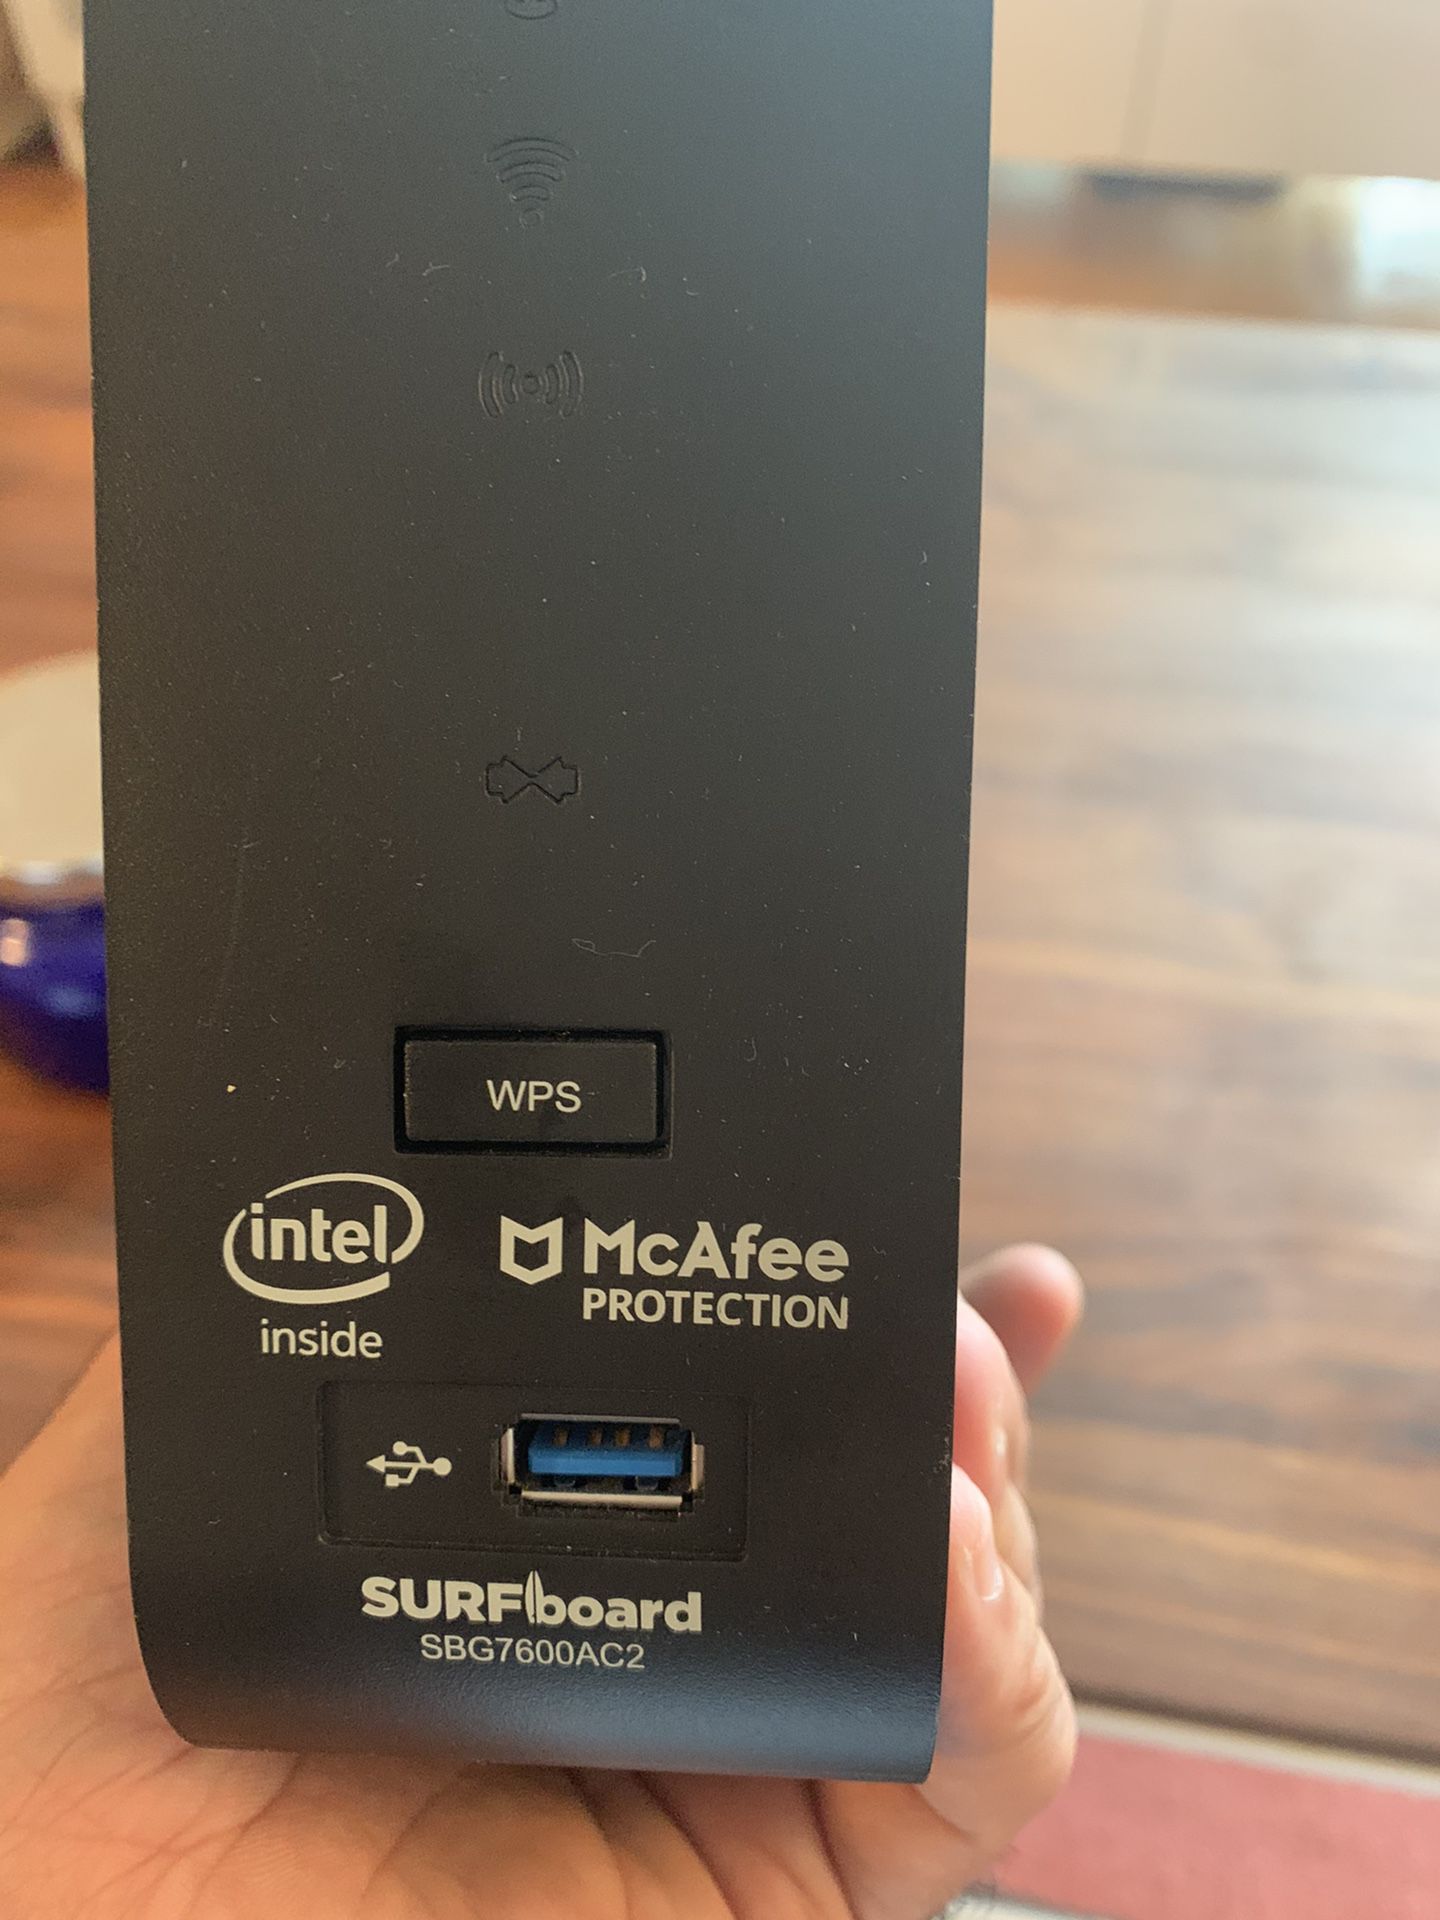 ARRIS SURFboard sbg7600AC2 Modem and Router Combo